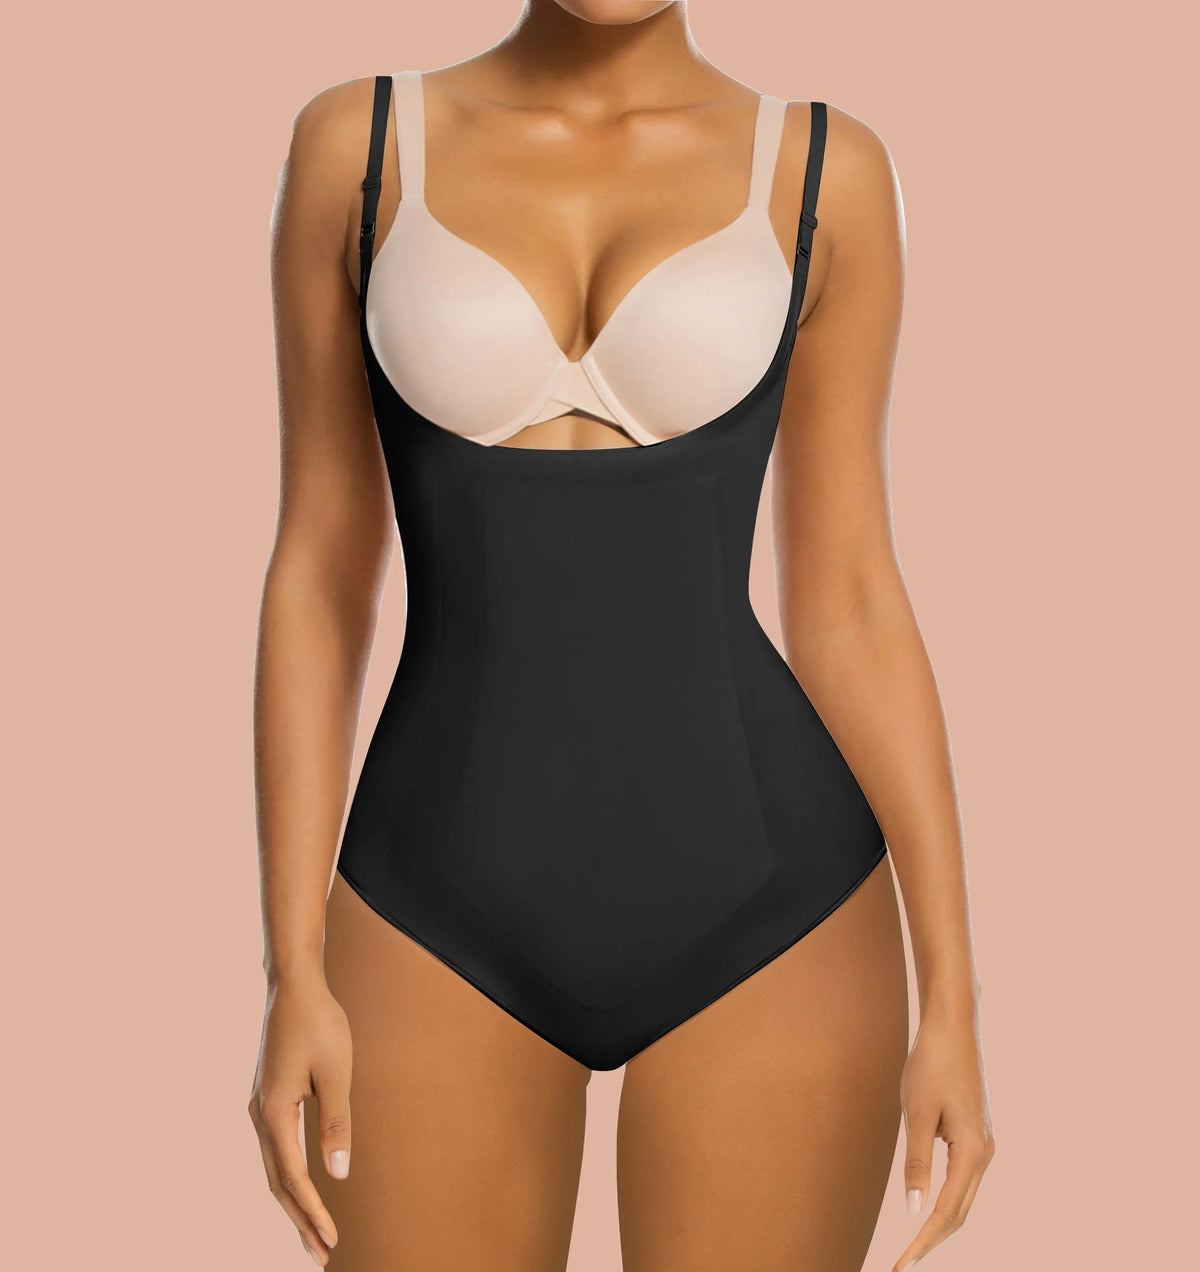 Seamless Tummy Control Bodysuit For Women DHL Wholesale Shapewear With Sculpting  Thong Briefs, Body Shaper Shapewear Tank, And Fast Shipping SHAPERX From  Yeyehuang, $7.54